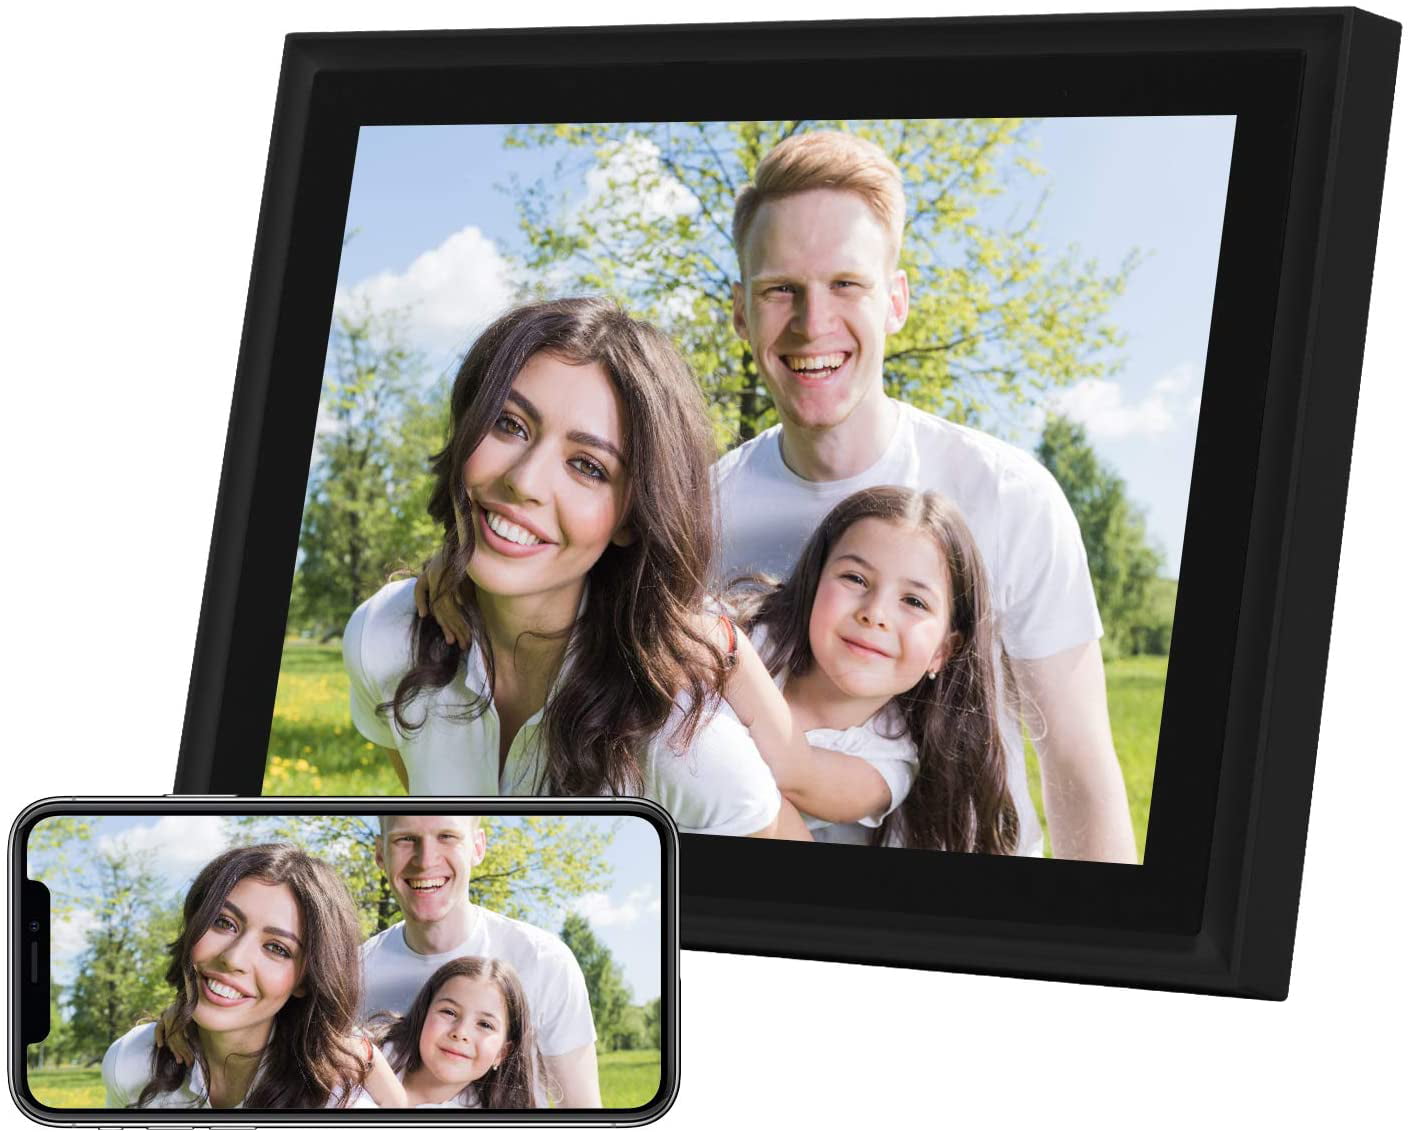 4:3 Share Moments Instantly via Frameo App from Anywhere FRAMEO 10 Inch Smart WiFi Digital Photo Frame 2048×1536 2K IPS LCD Touch Screen Support Micro SD Card 16GB Storage Auto-Rotate